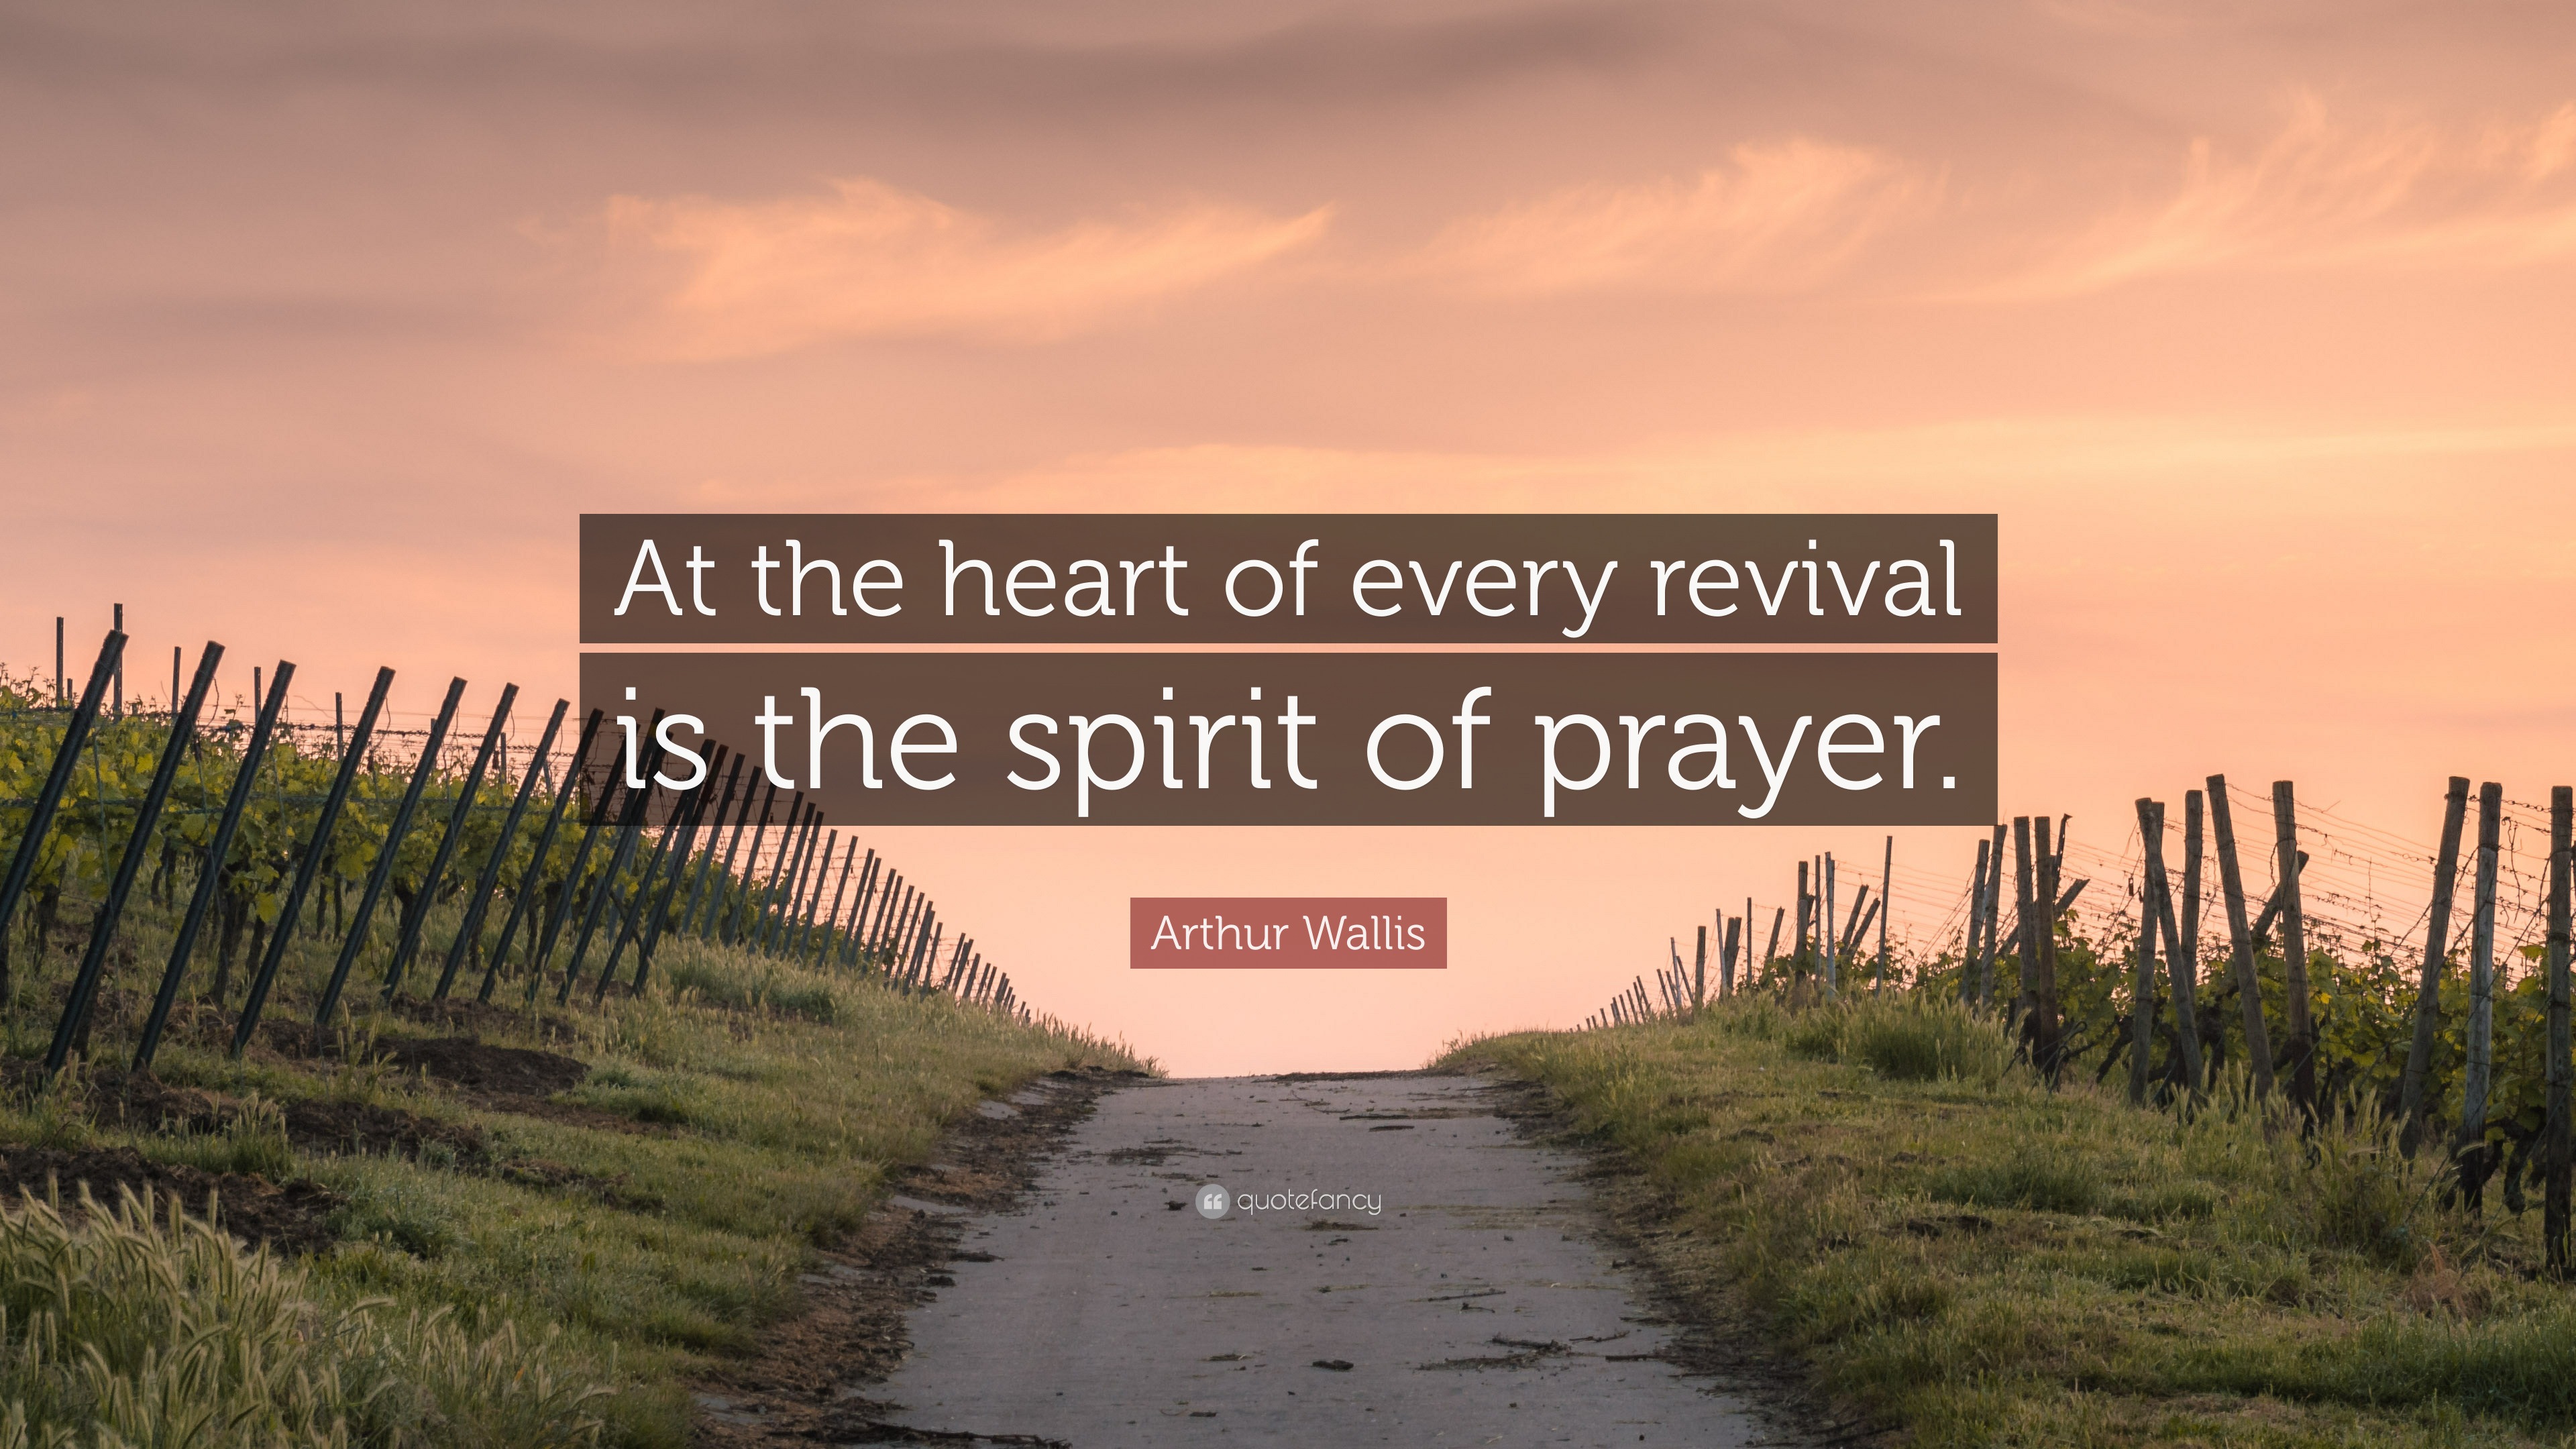 Arthur Wallis Quote “At the heart of every revival is the spirit of